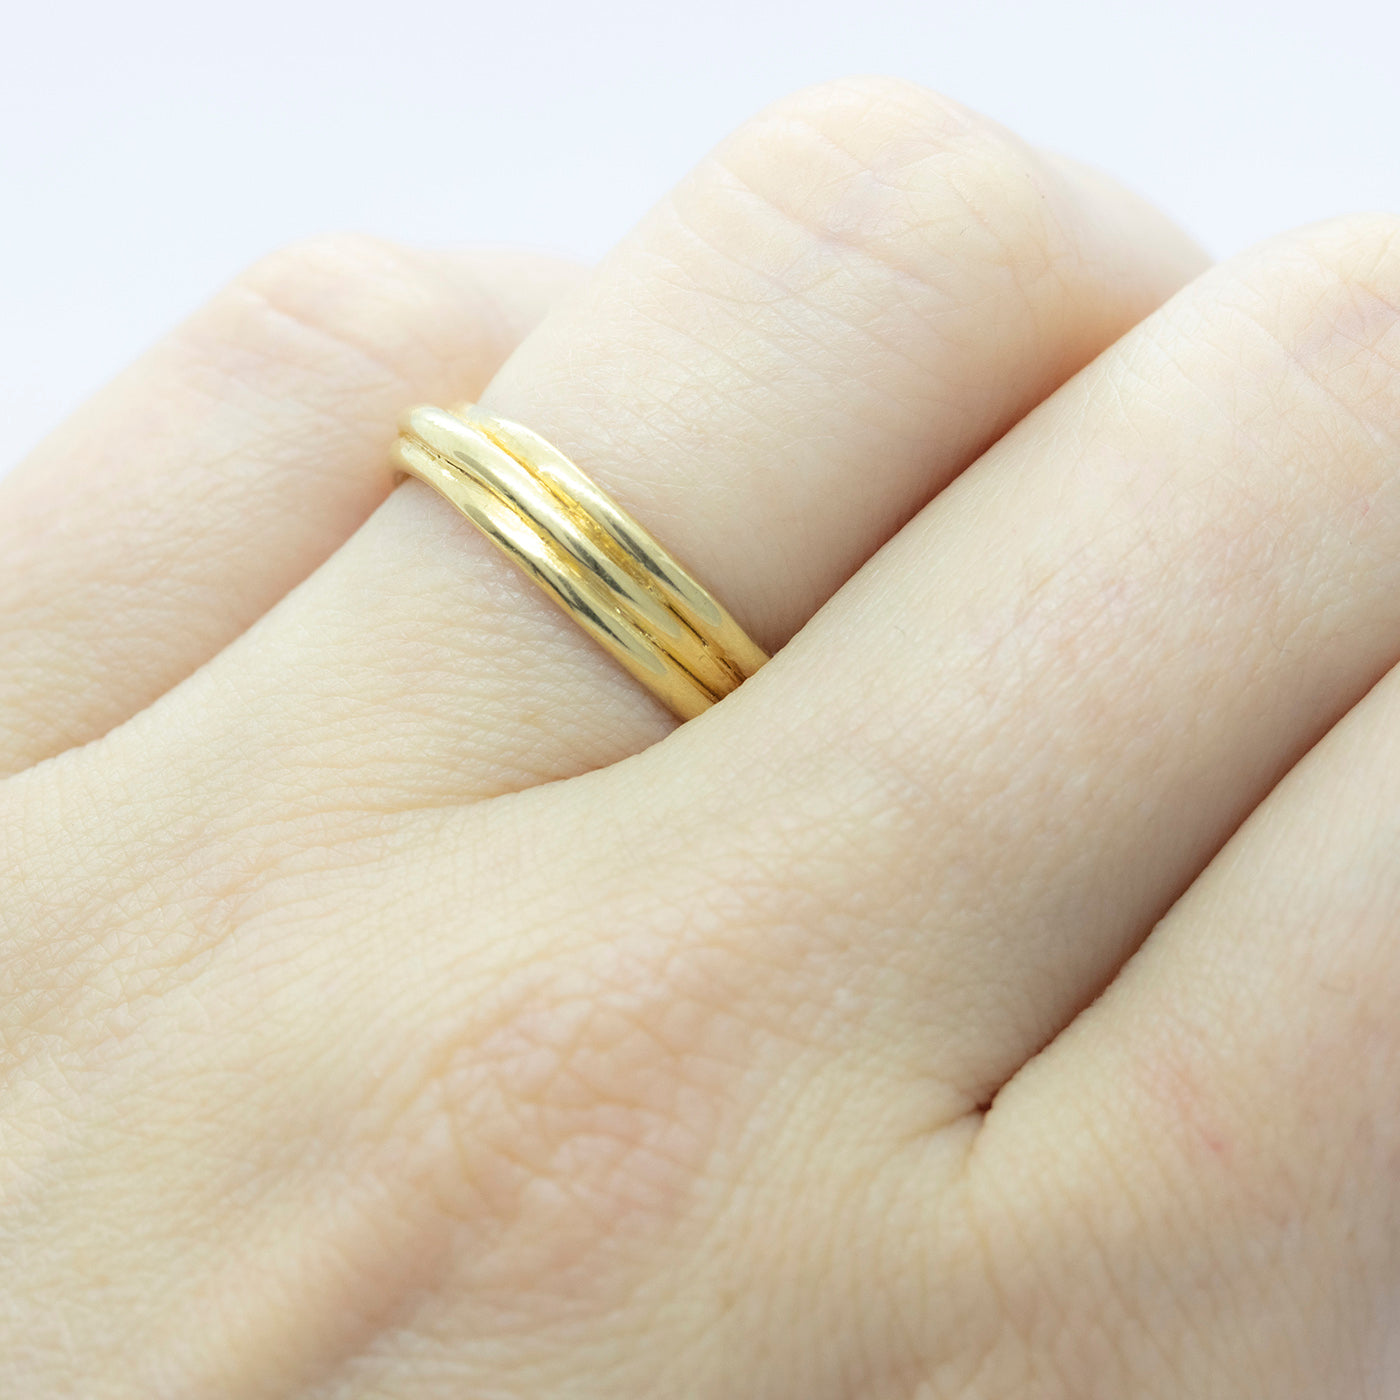 Ring Embrace Wedding Band for Her 14ct or 18ct yellow gold product side view innan jewellery independent atelier berlin